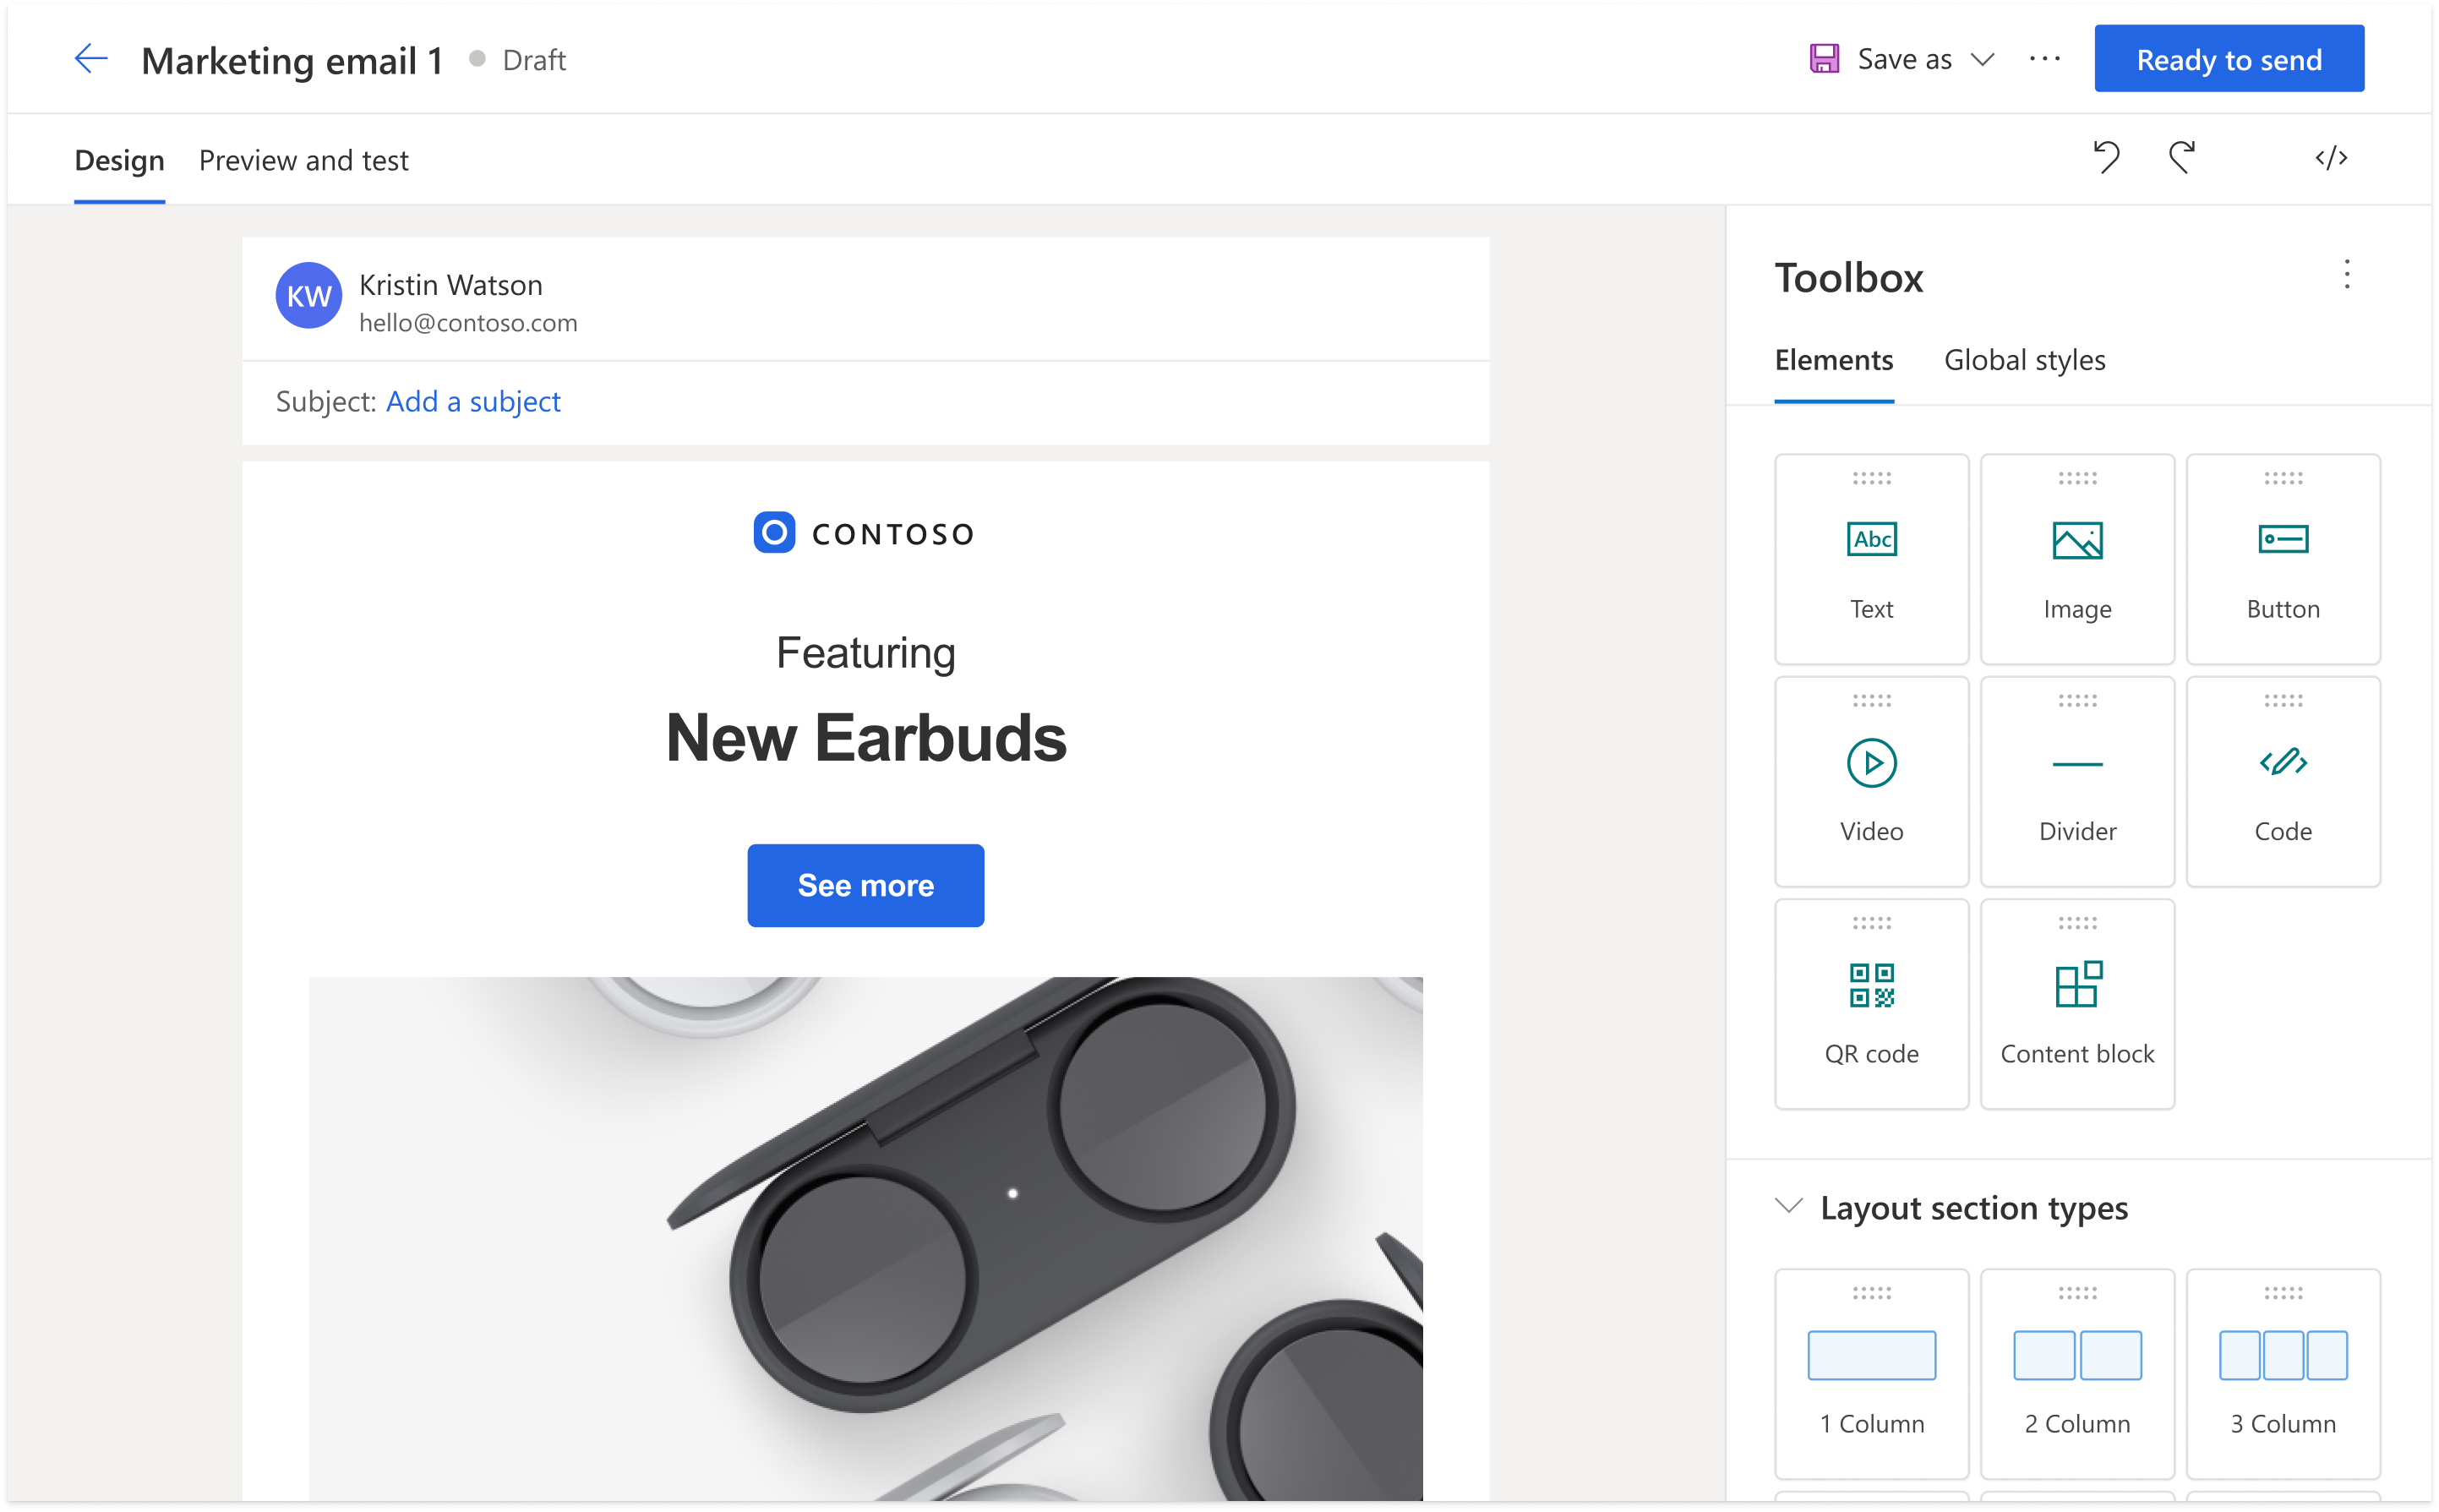 The revamped email editor